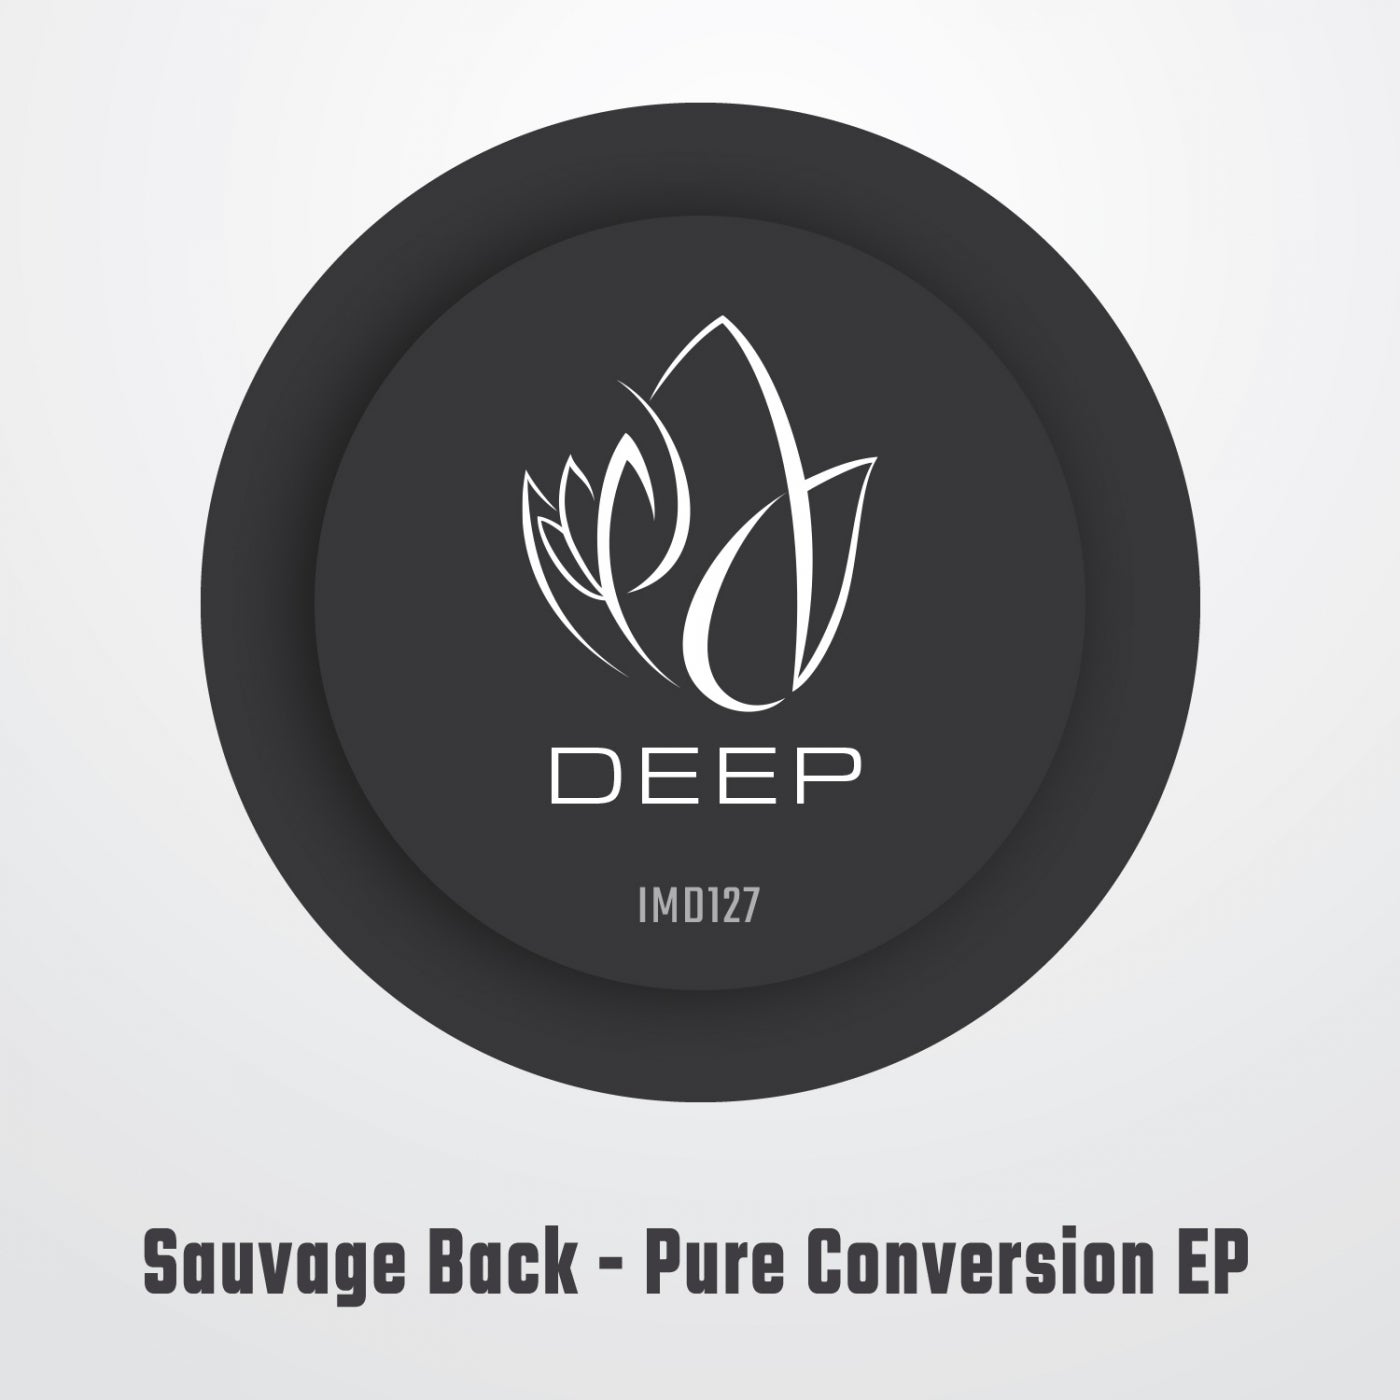 image cover: Sauvage back - Pure Conversion EP / IMD127